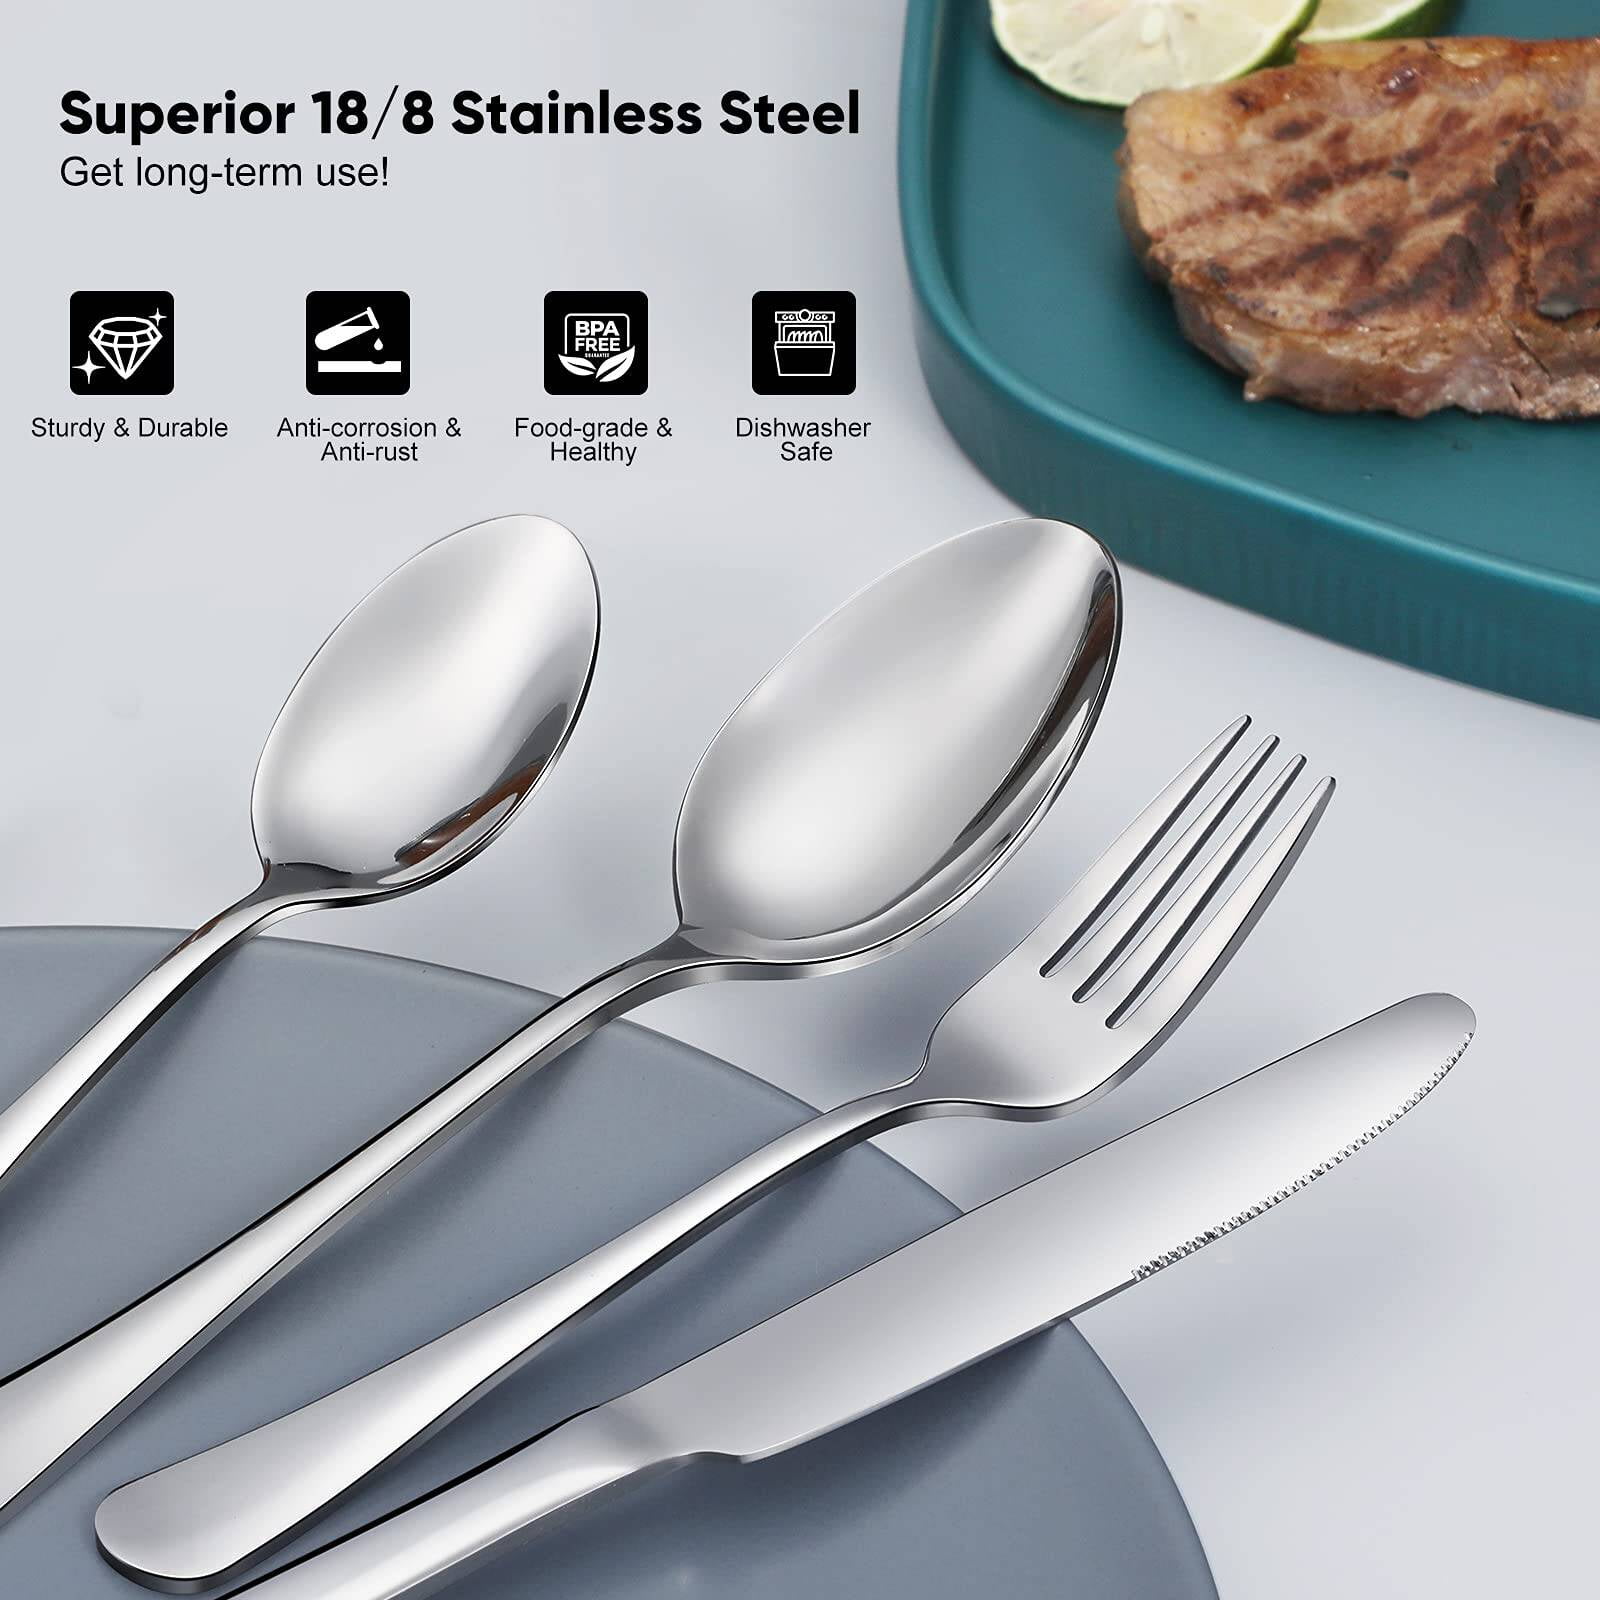 HIWARE 48-Piece Silverware Set with Steak Knives for Nepal